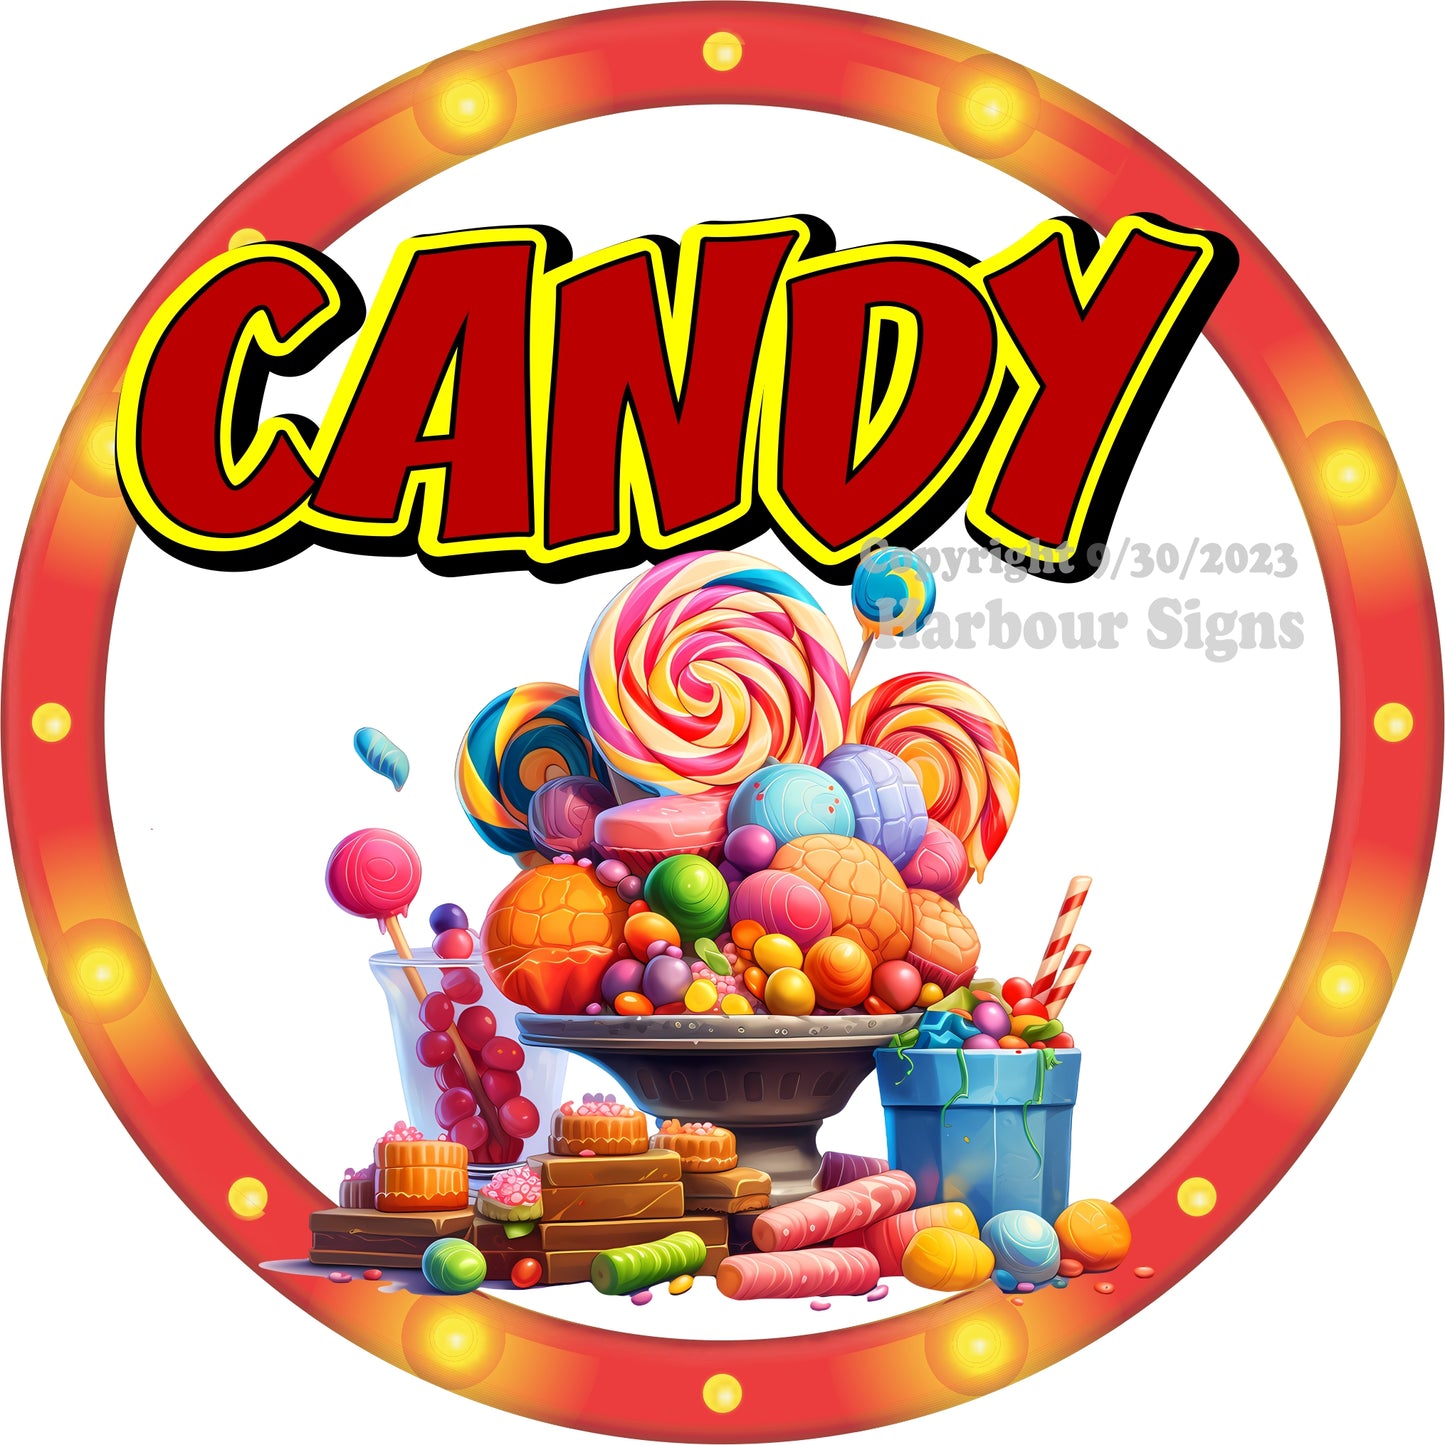 Candy Decal Food Truck Concession Vinyl Sticker c2